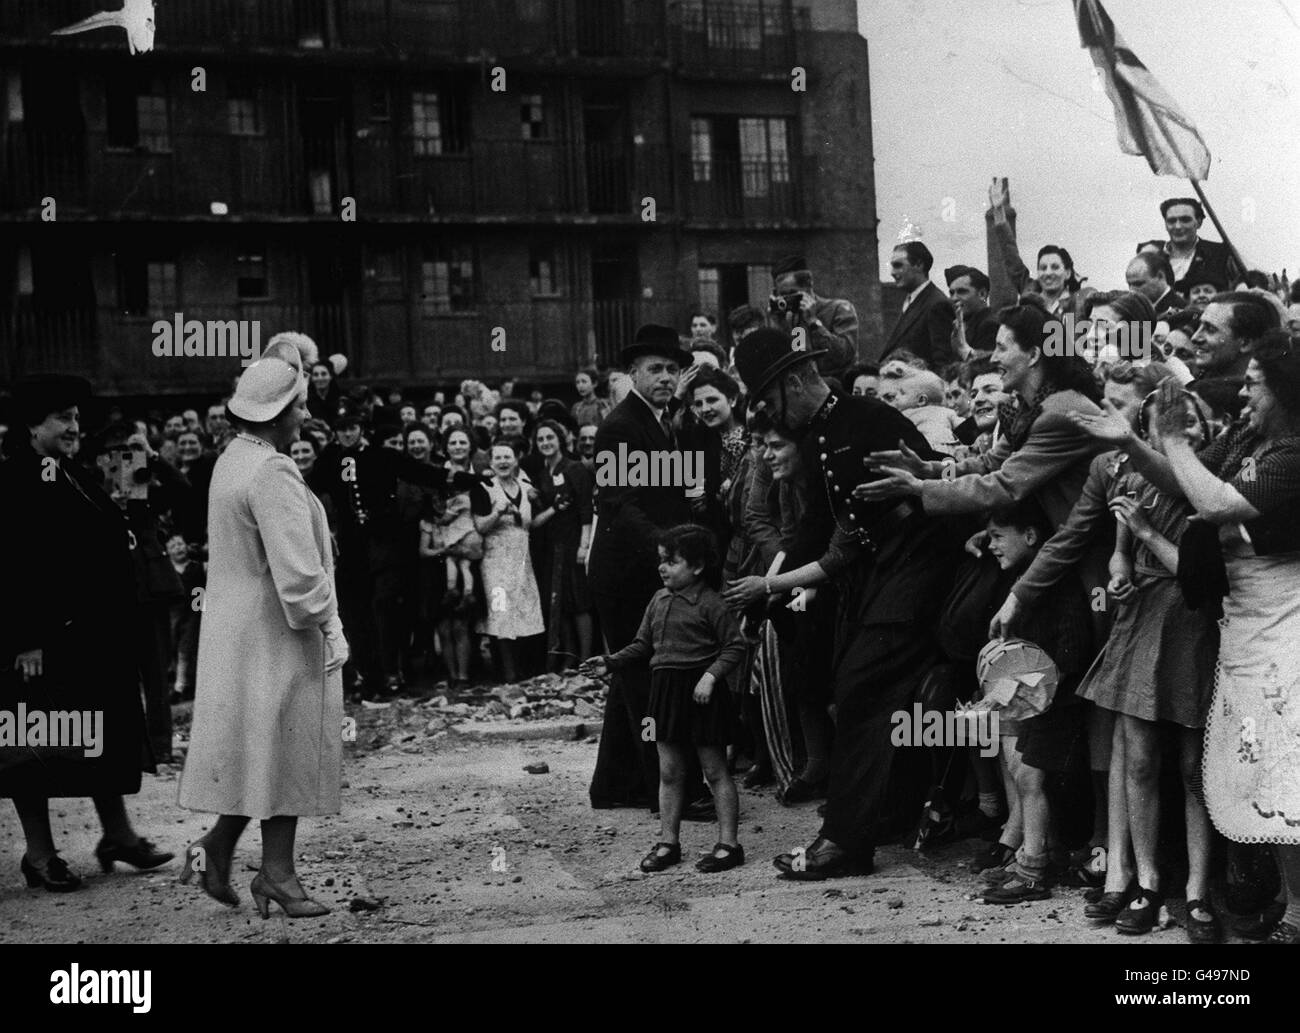 Queen Elizabeth (later the Queen Mother) gets a warm welcome from East Enders at Vallence Road in Stepney, London during her visit to areas affected by Luftwaffe air raids during the Blitz. Stock Photo